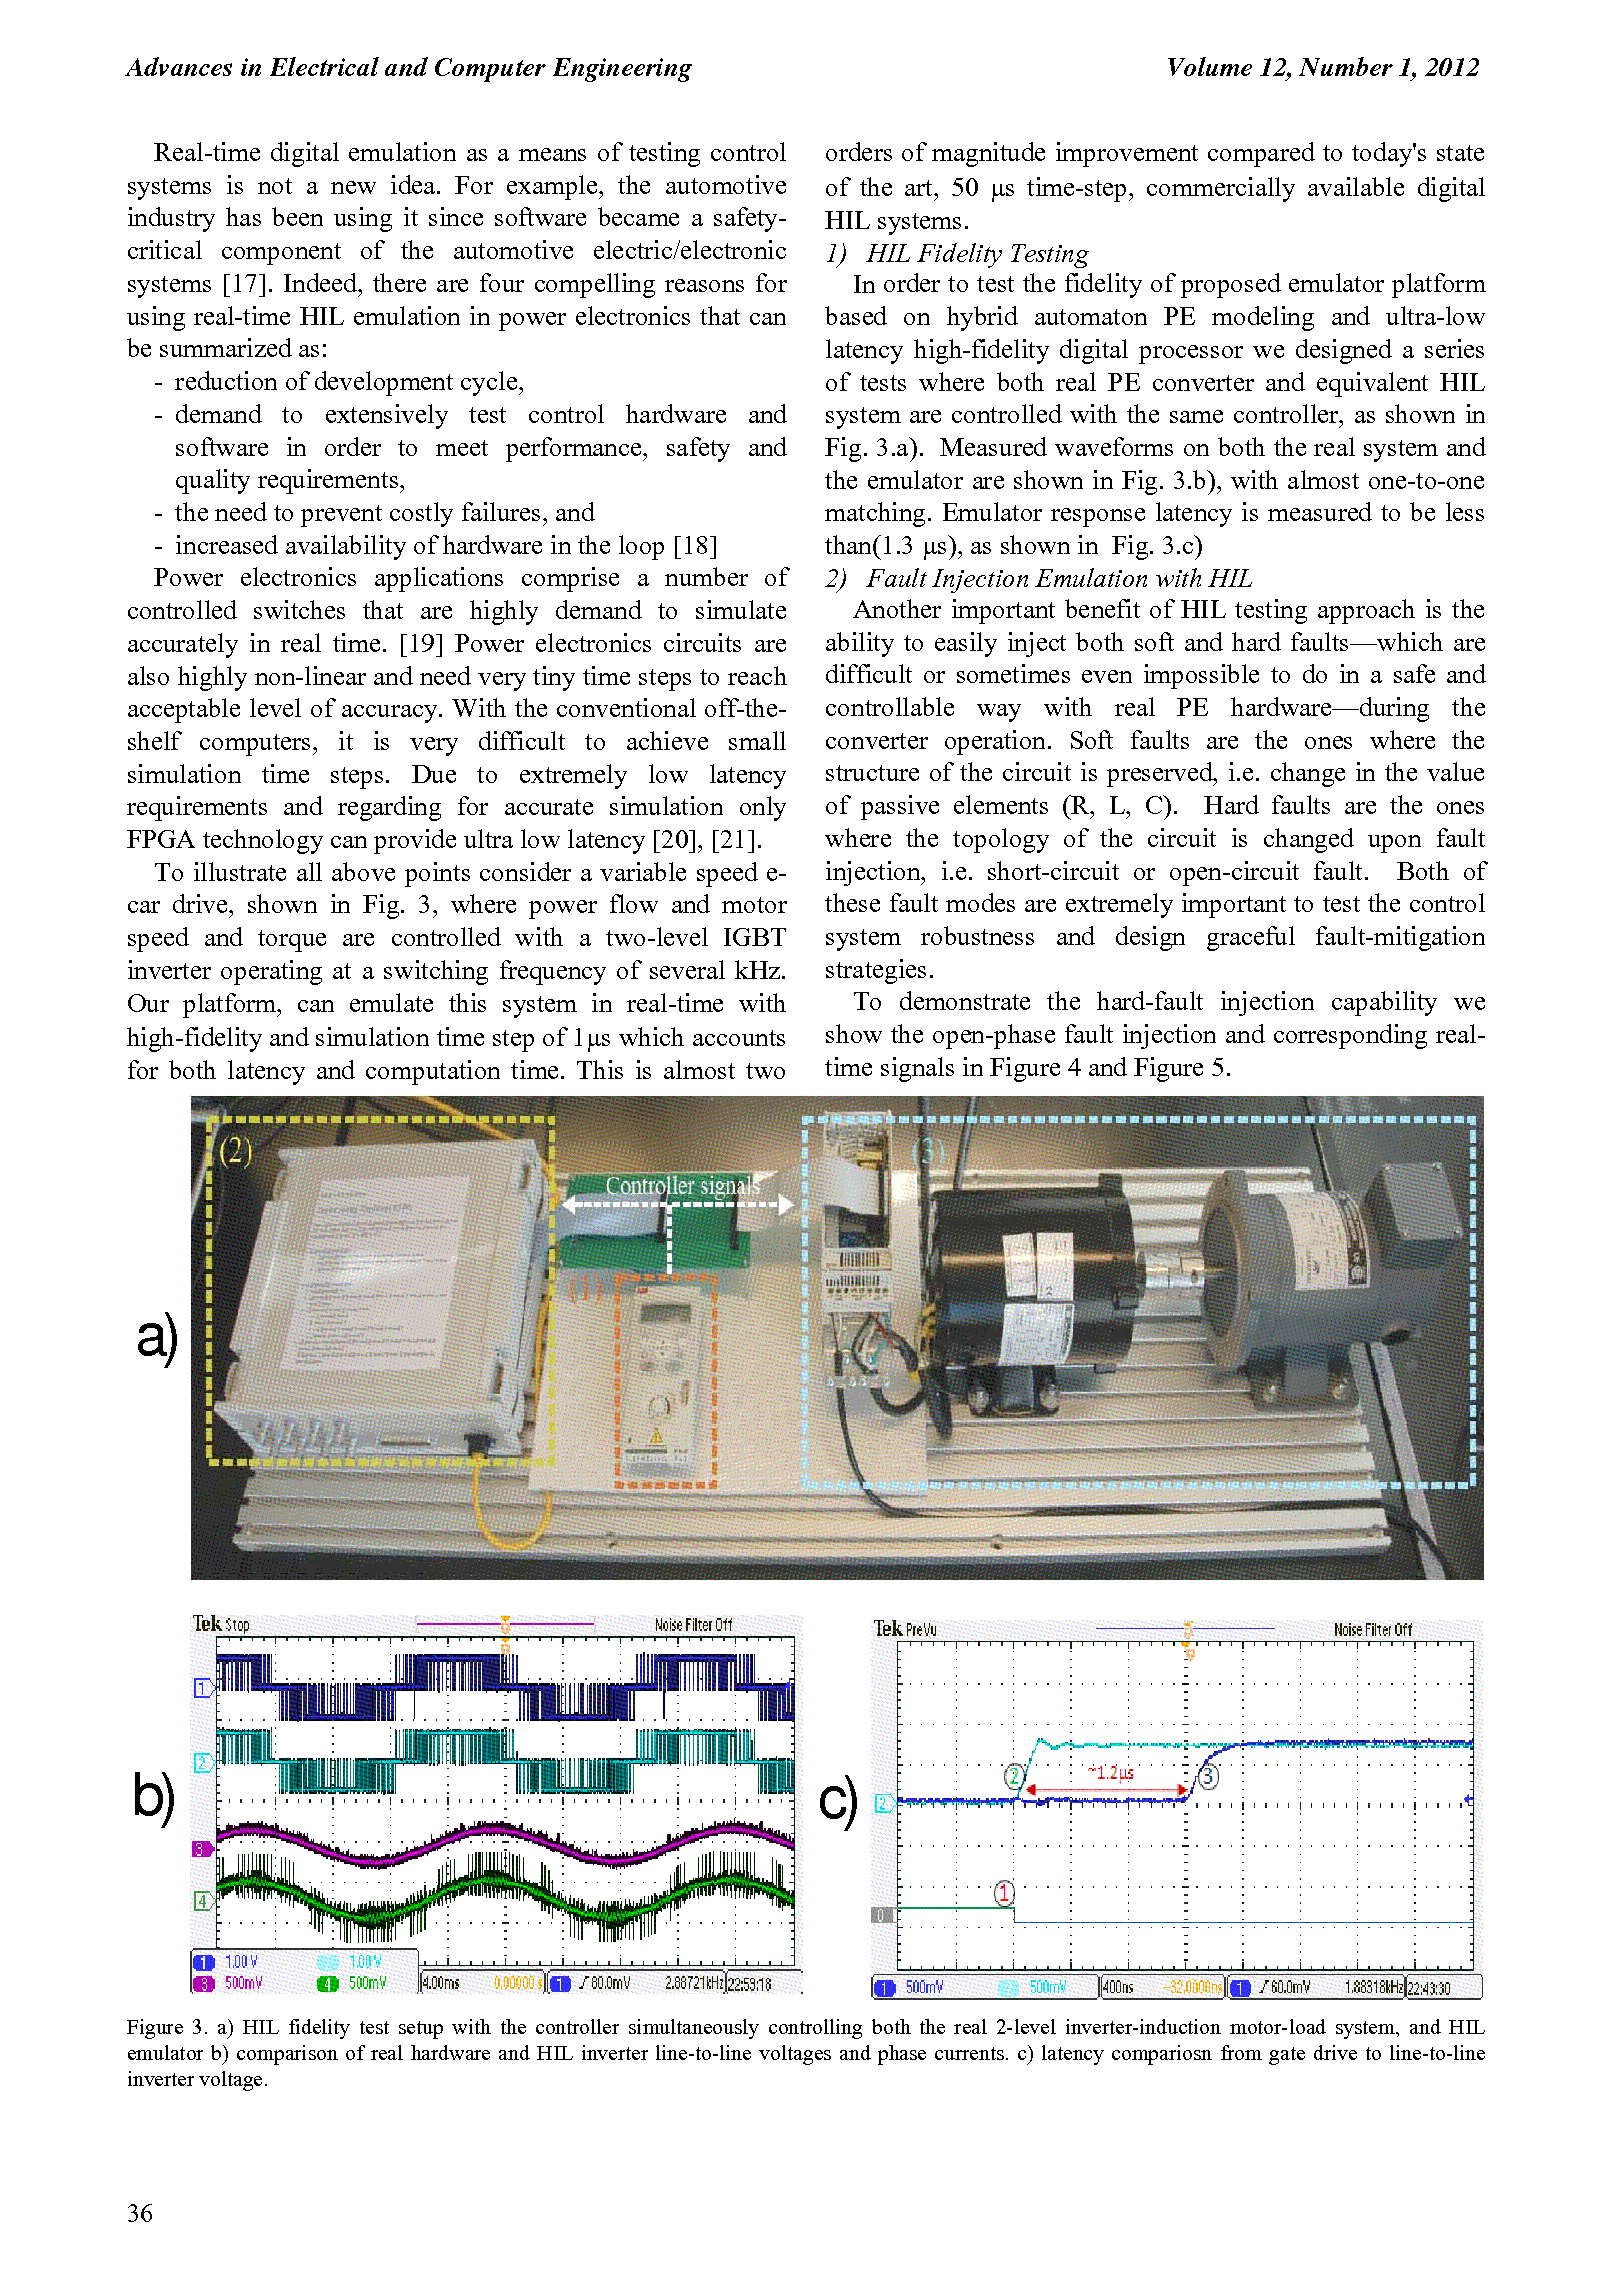 PDF Quickview for paper with DOI:10.4316/AECE.2012.01006